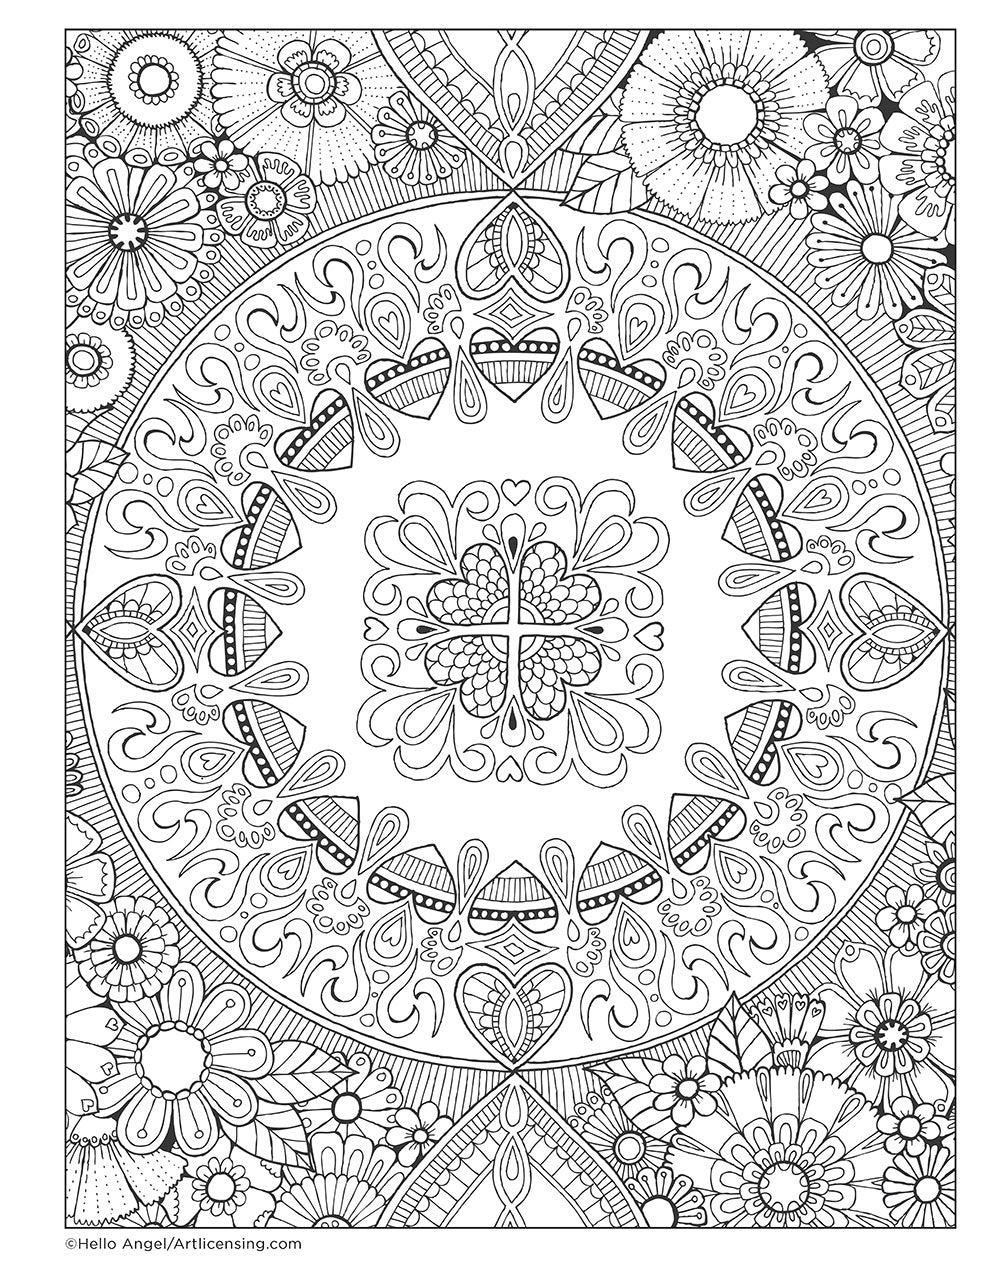 Hello Angel Mindfulness Coloring Collection